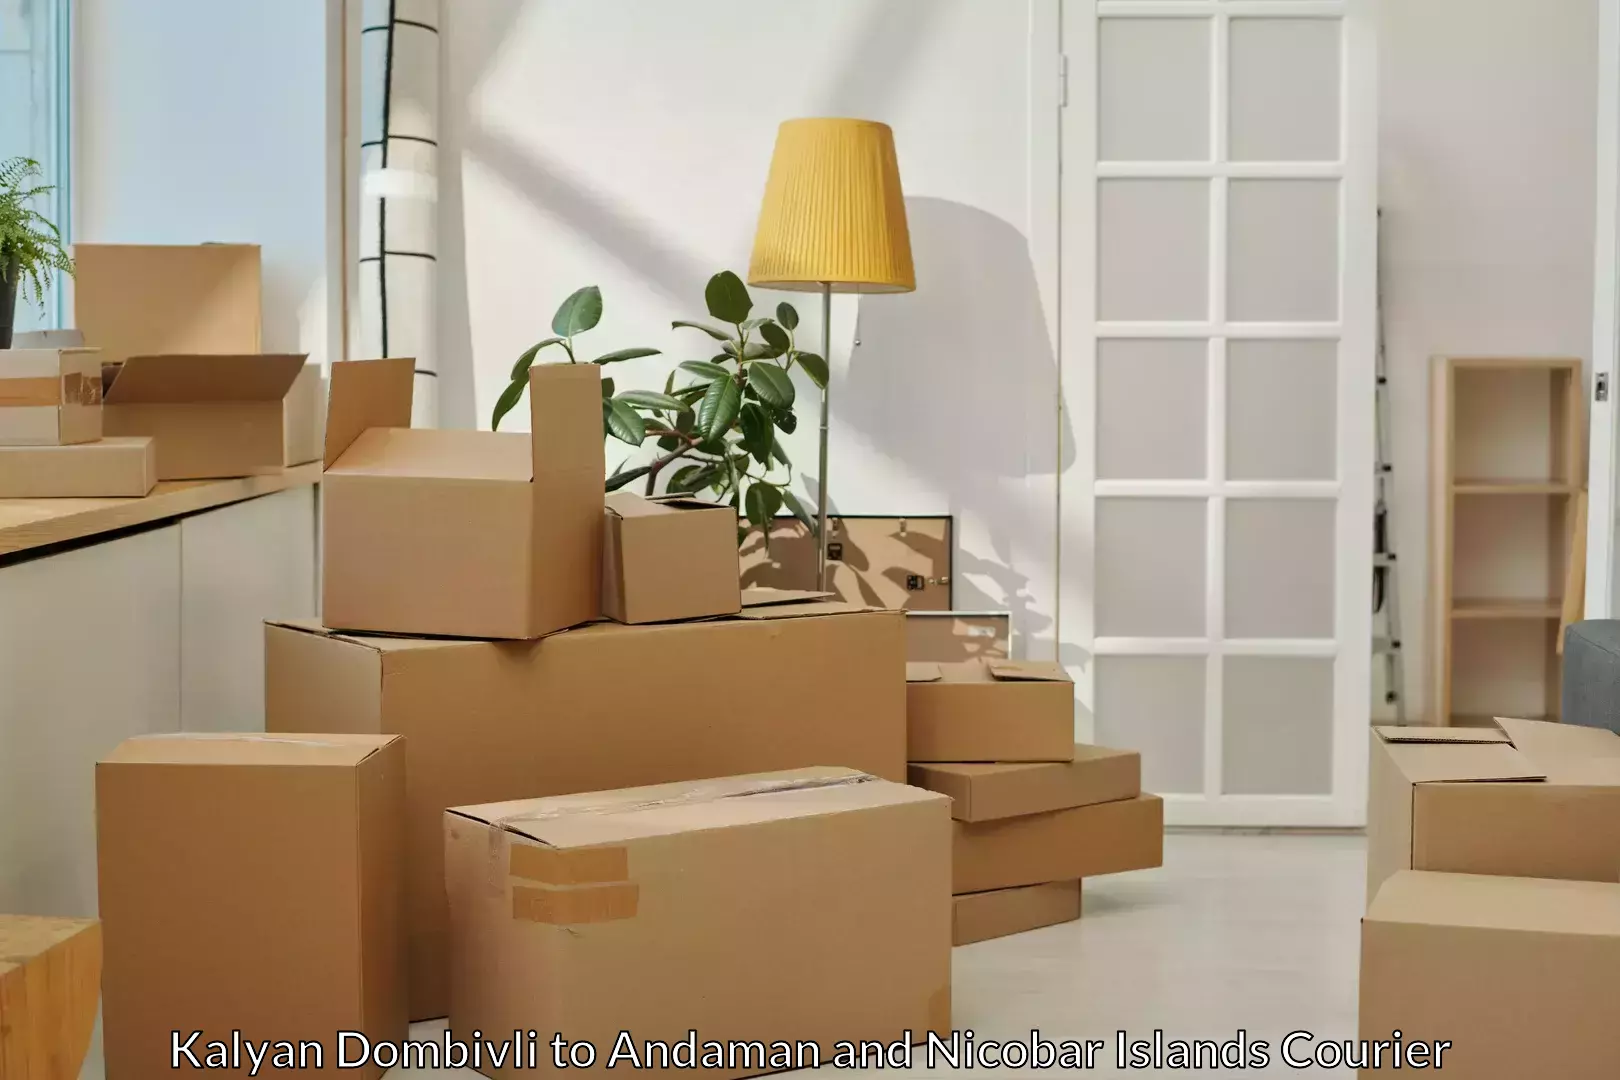 Professional moving company in Kalyan Dombivli to Port Blair